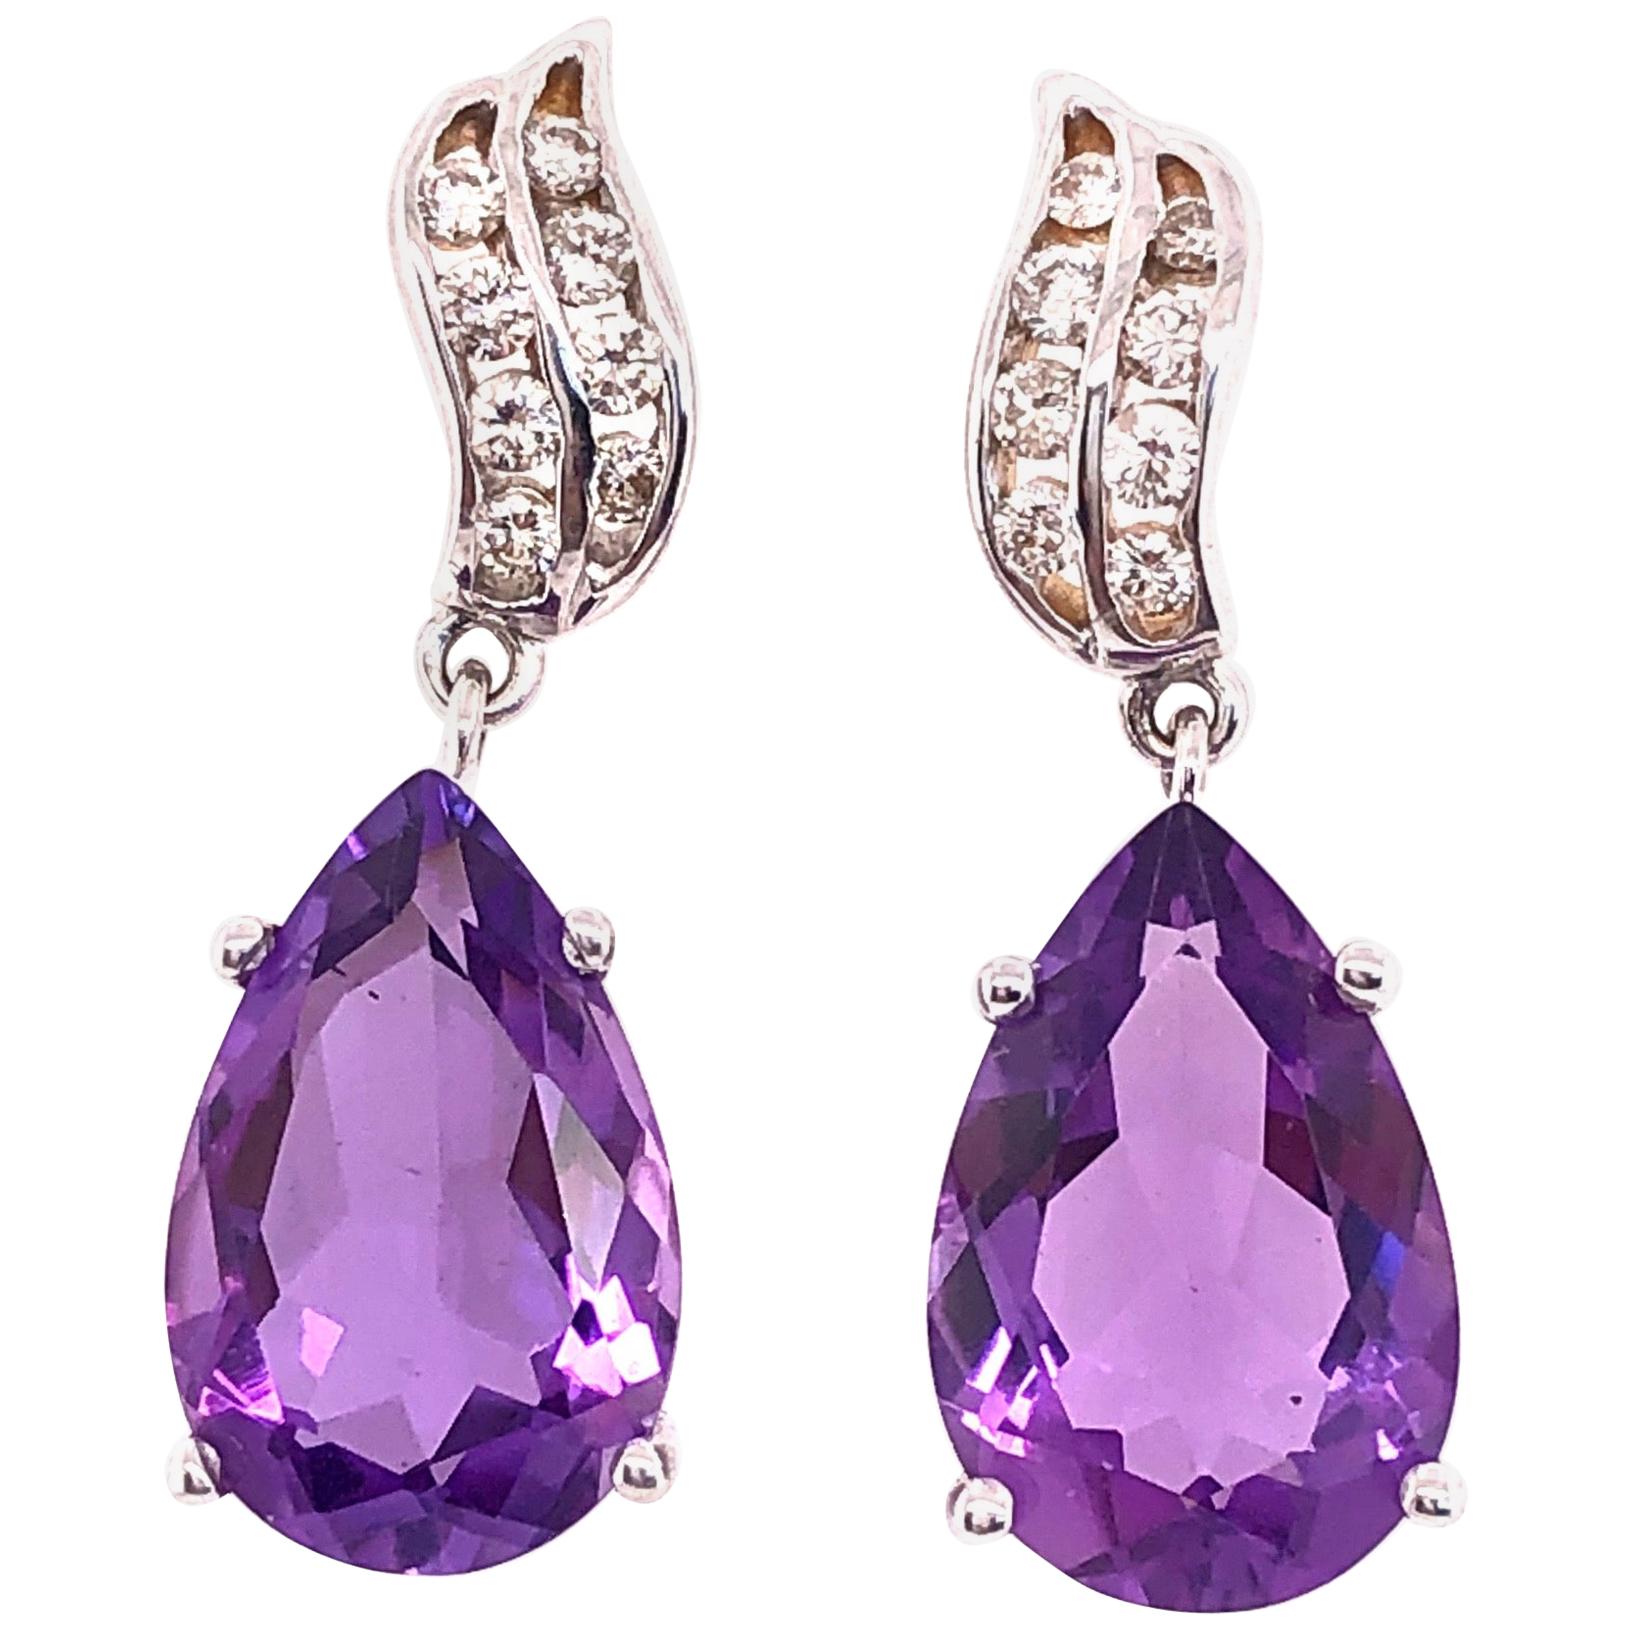 14 Karat Gold Earrings with Diamonds and Amethysts 0.50 Total Diamond Weight For Sale